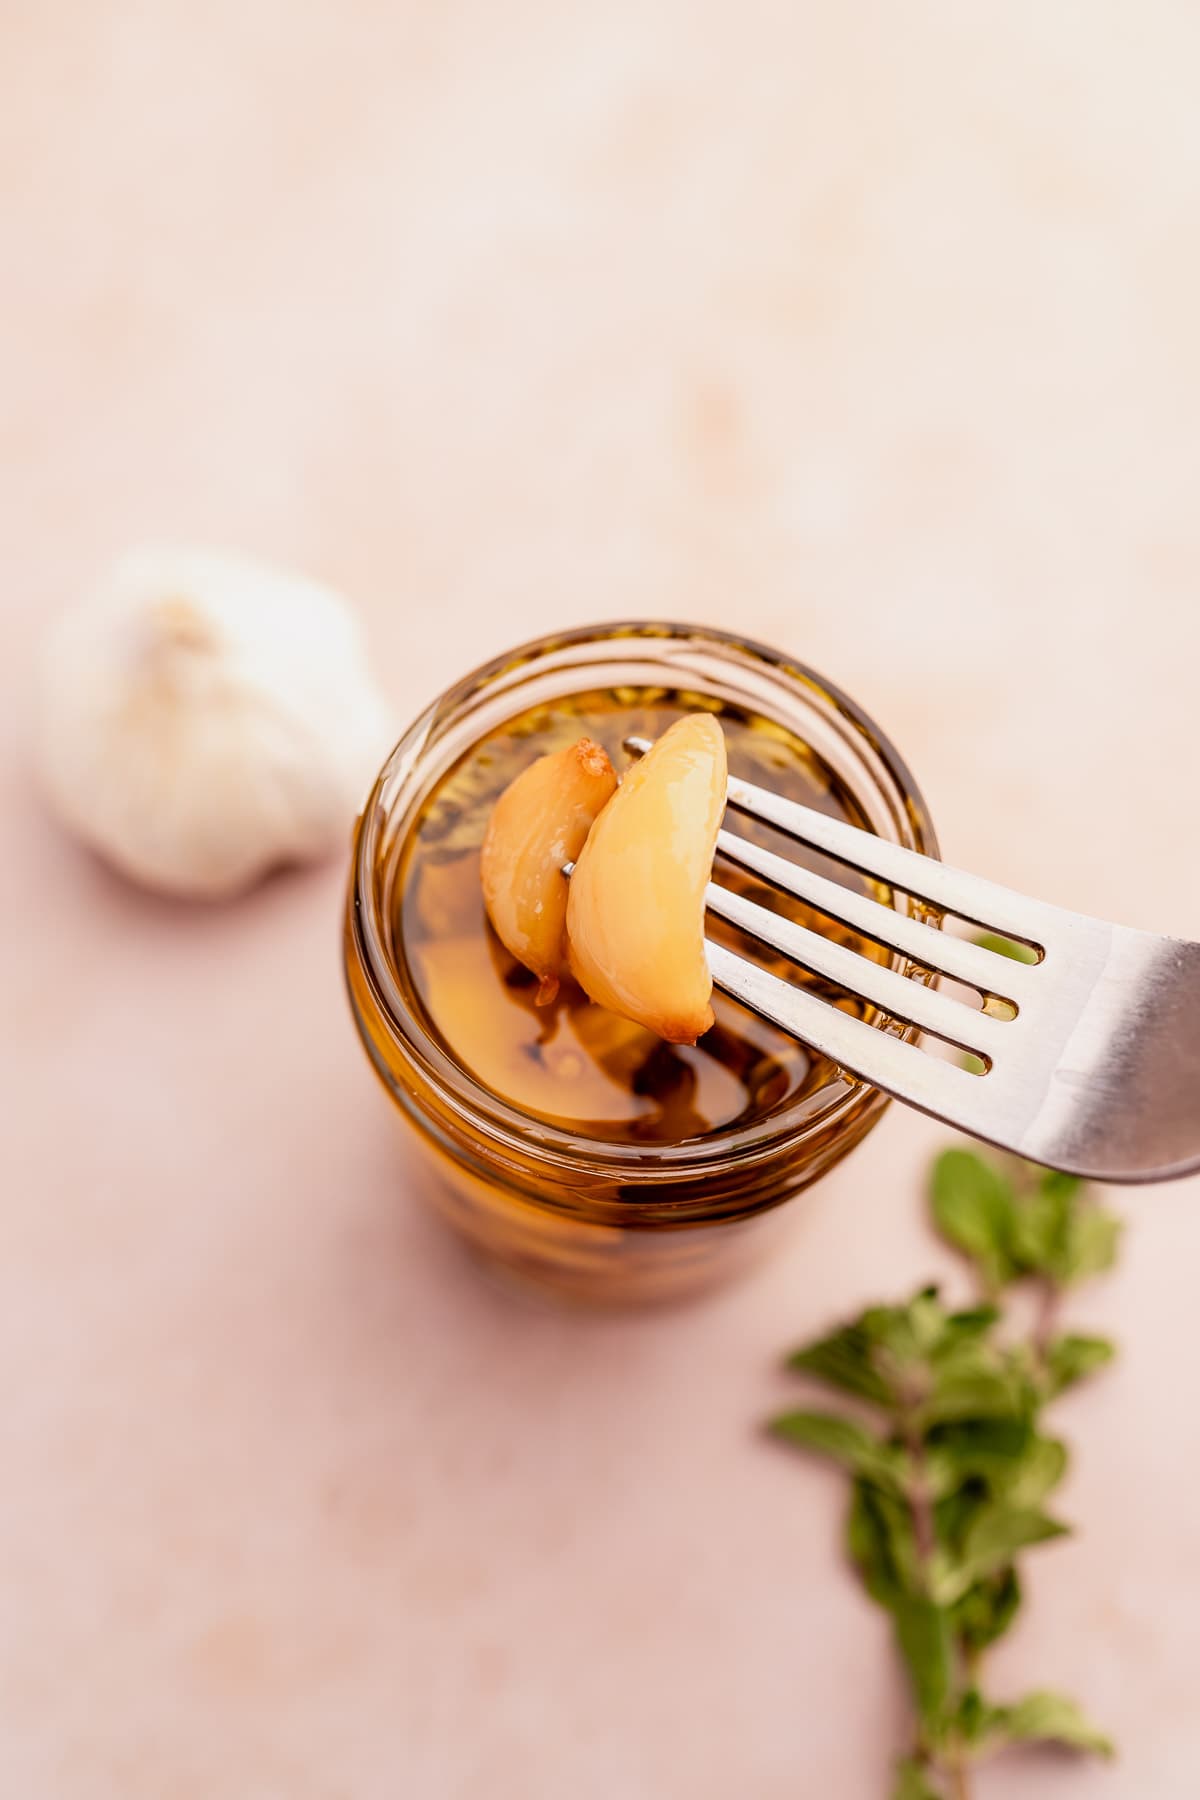 A jar of garlic confit with a fork on a table.